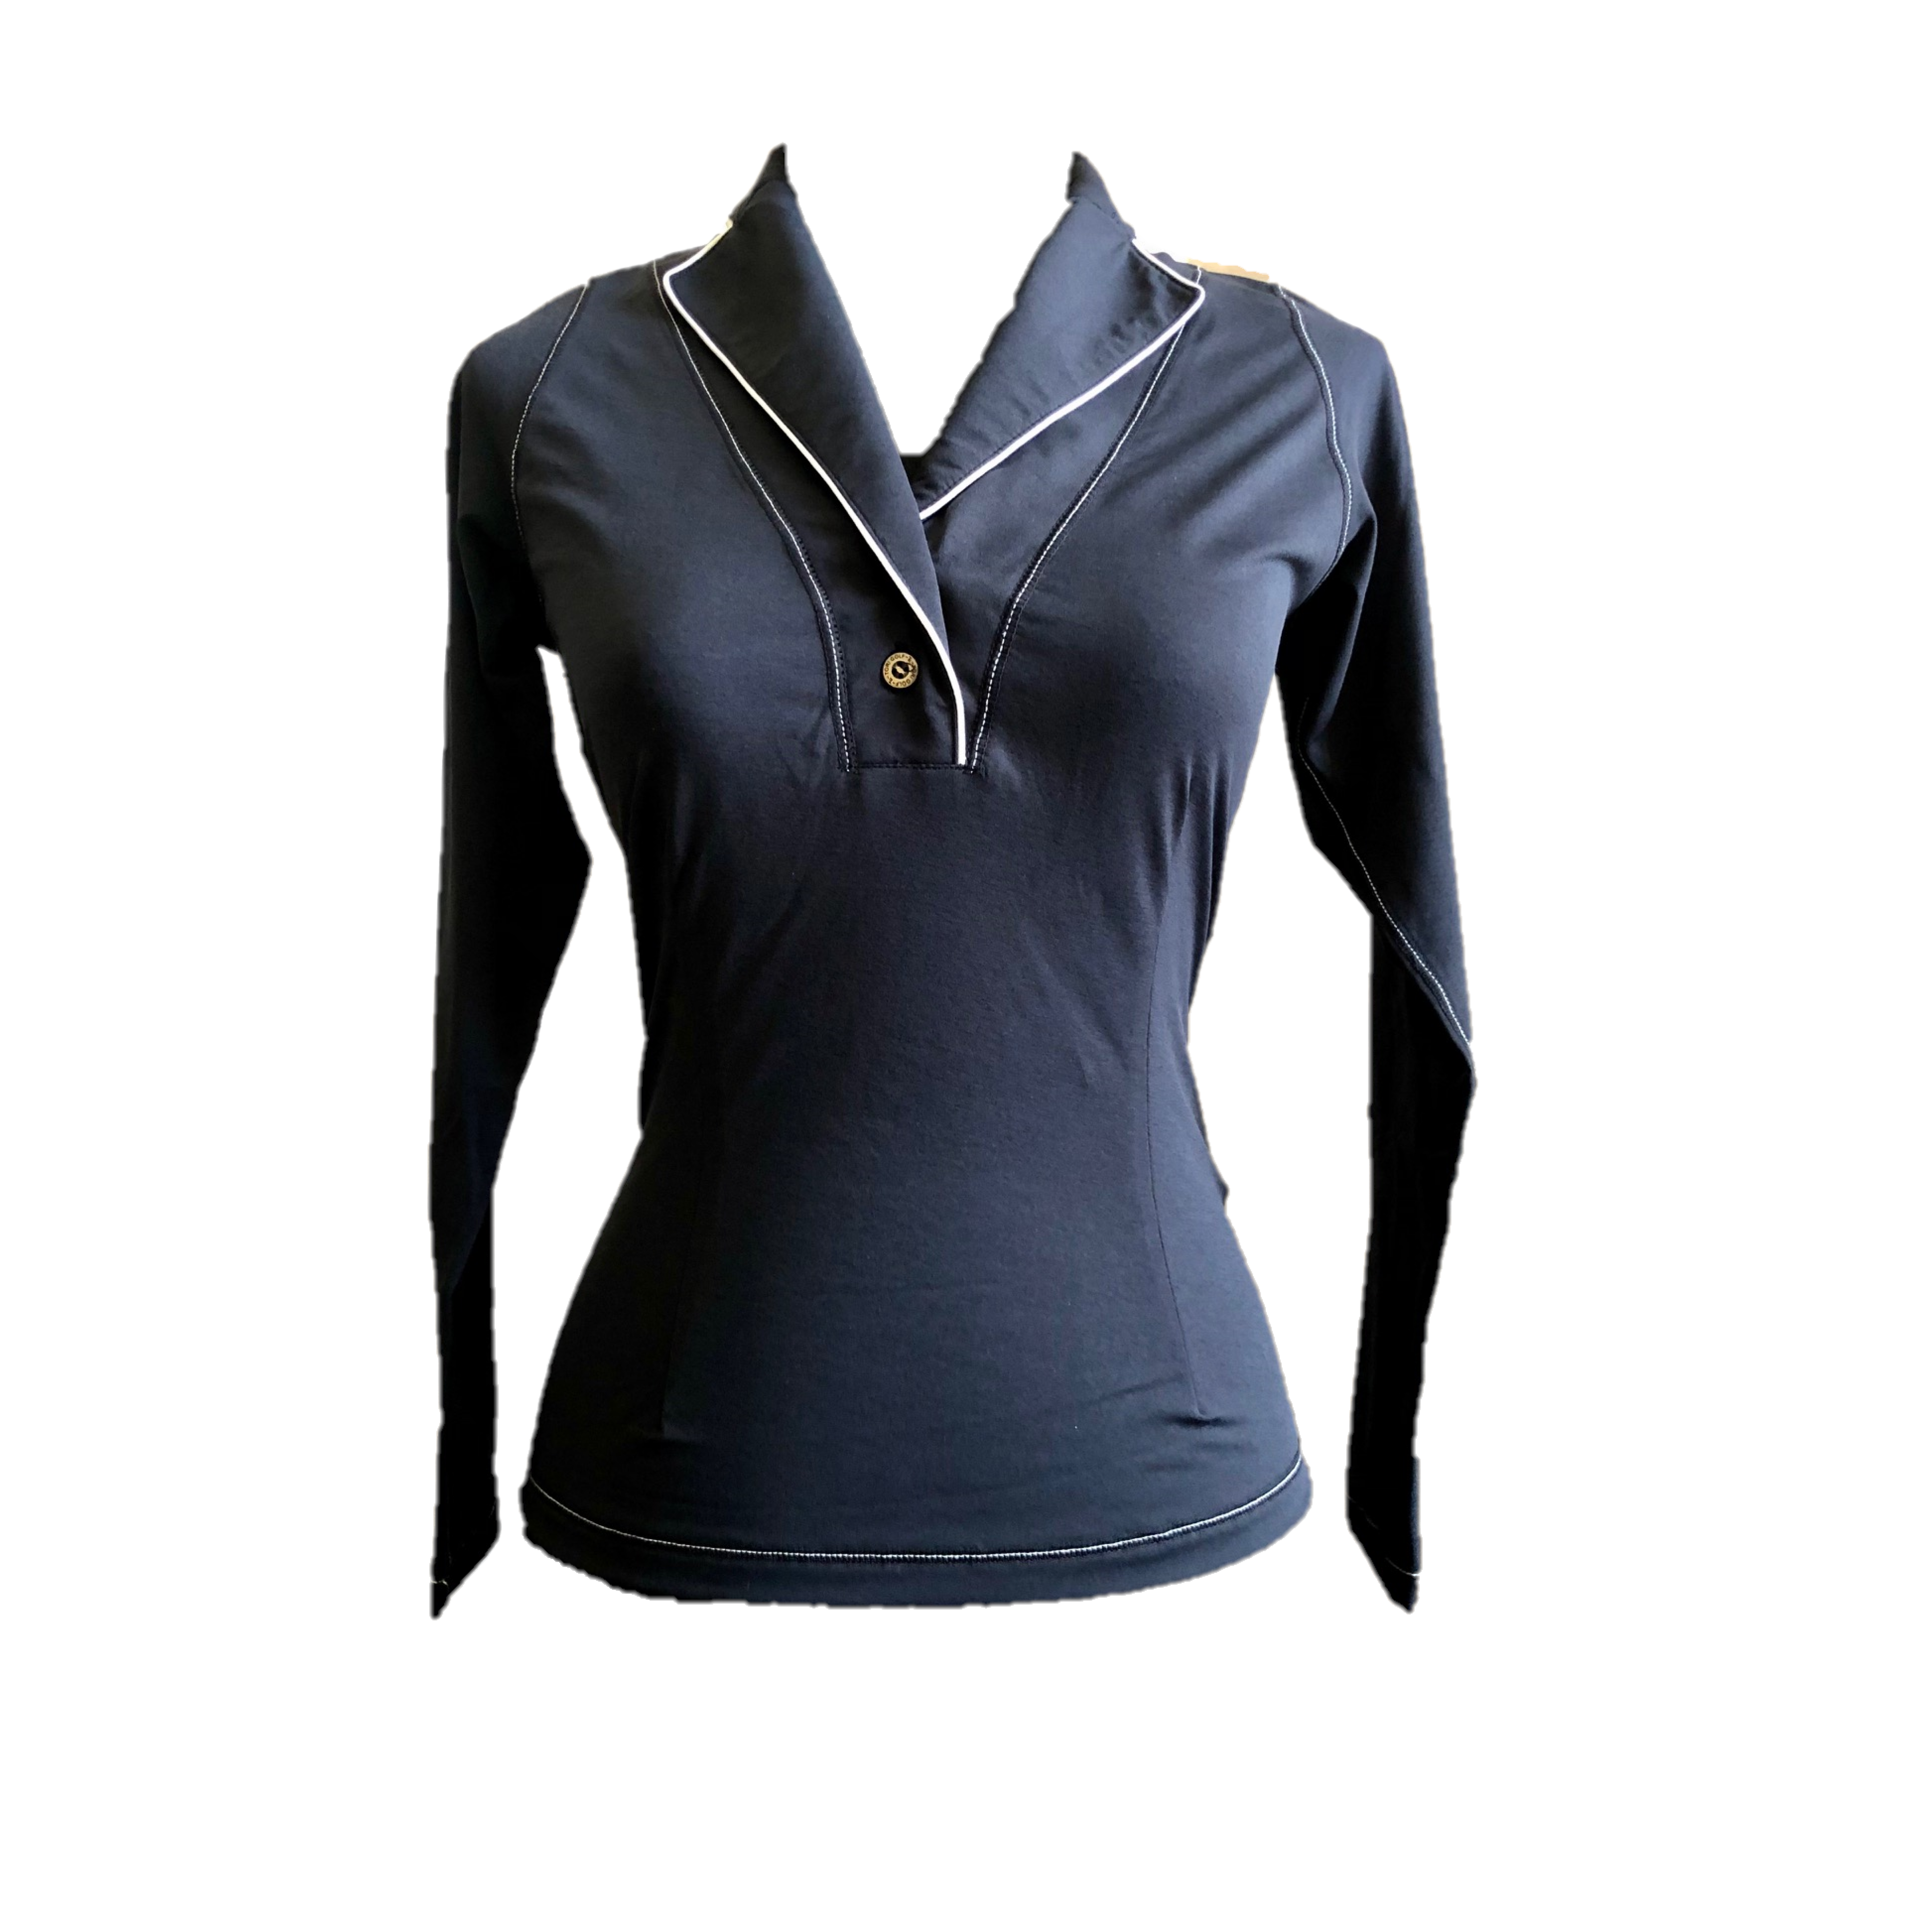 LT-110 || Ladies Top Black Long Sleeve Shawl Neck 2 Button With White Piping.